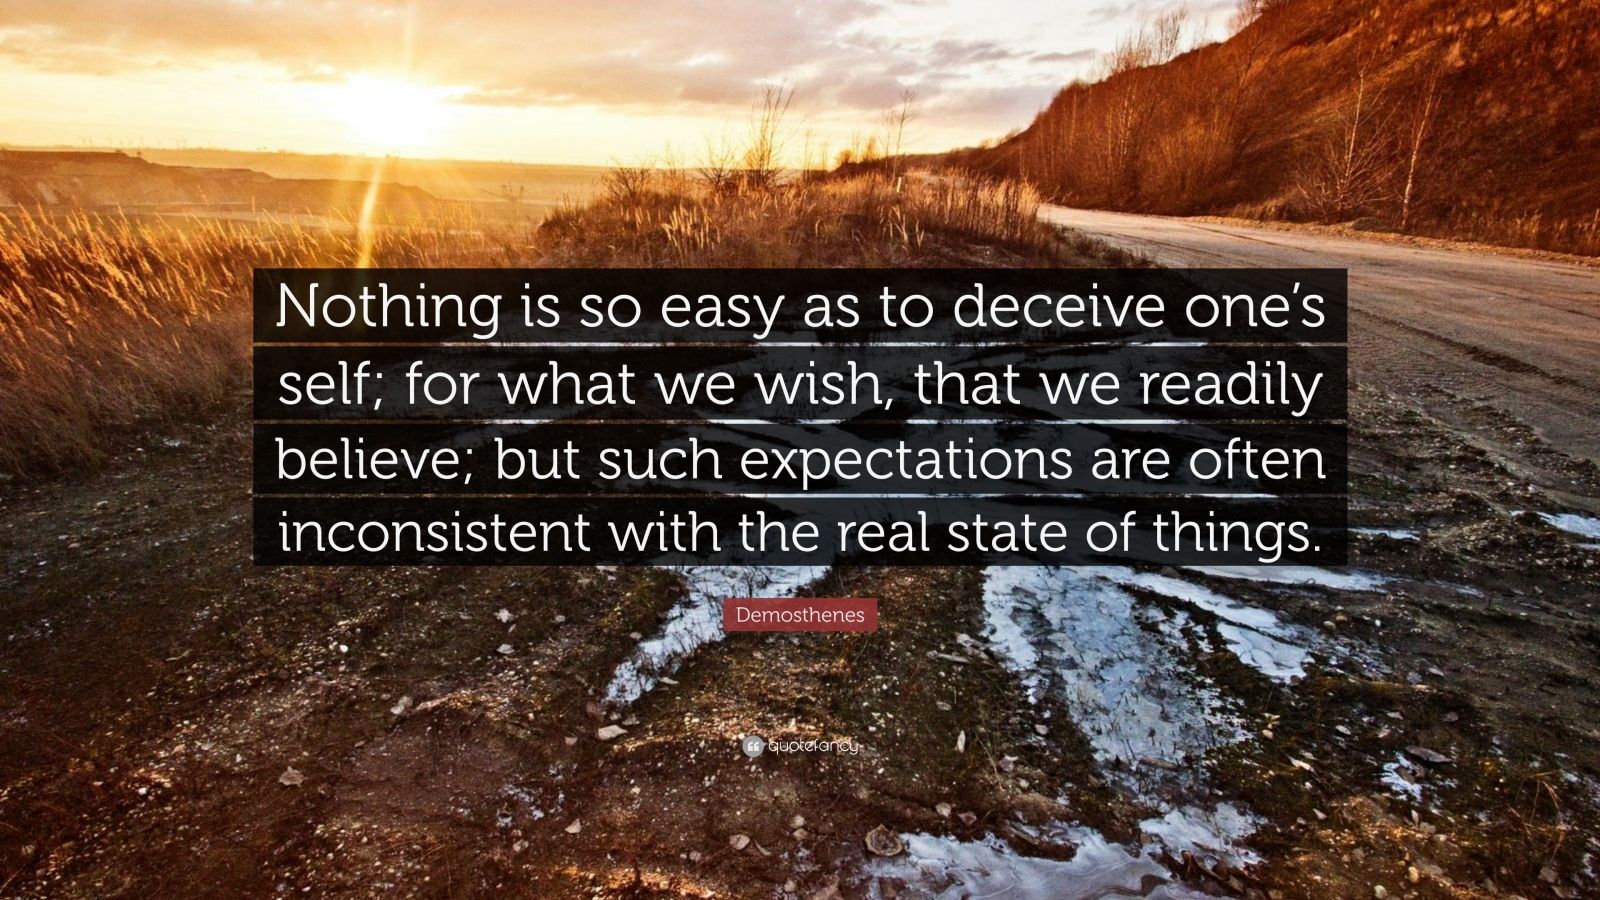 Demosthenes Quote: “Nothing is so easy as to deceive one’s self; for ...